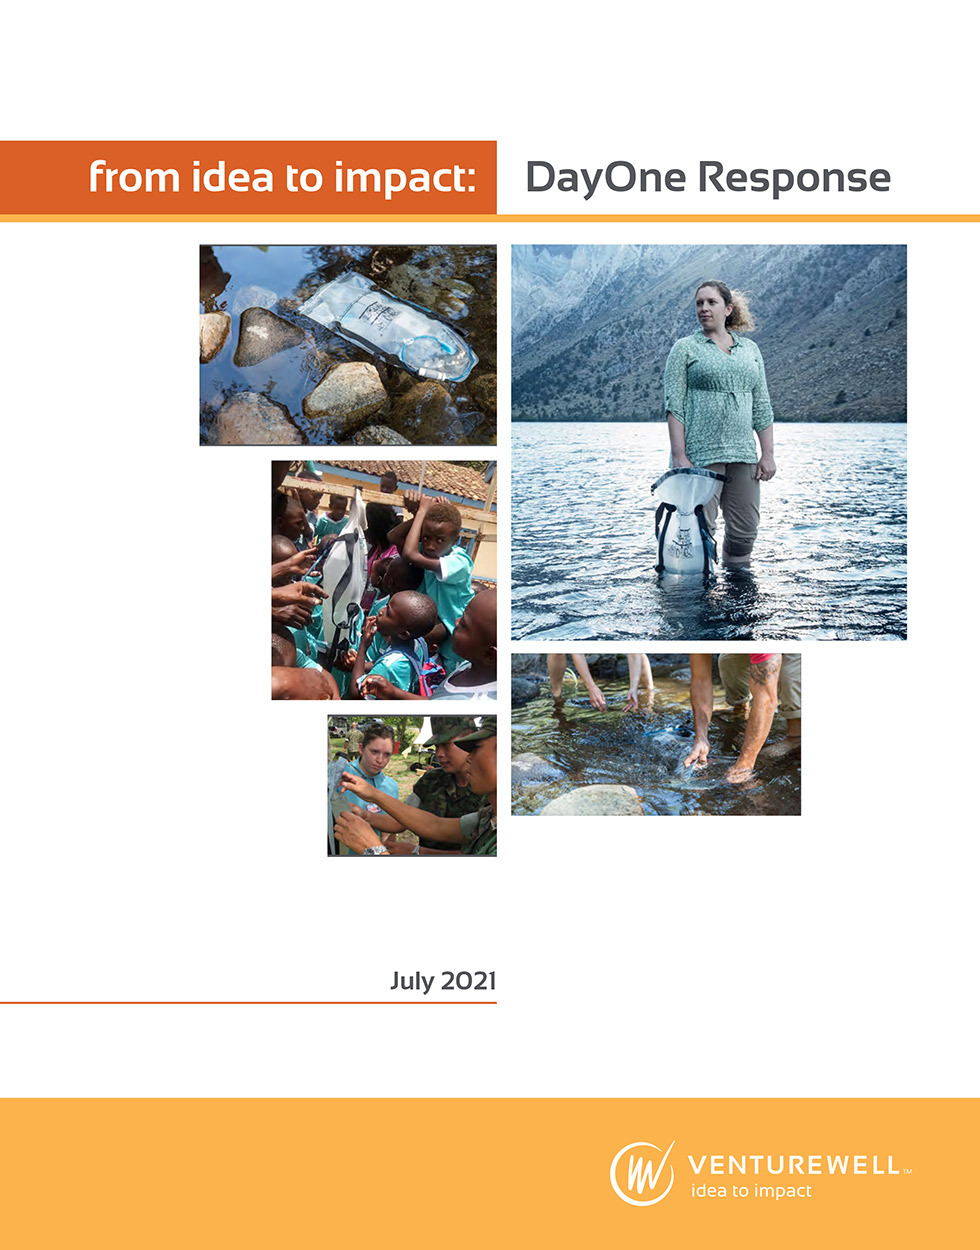 From Idea to Impact: DayOne Response